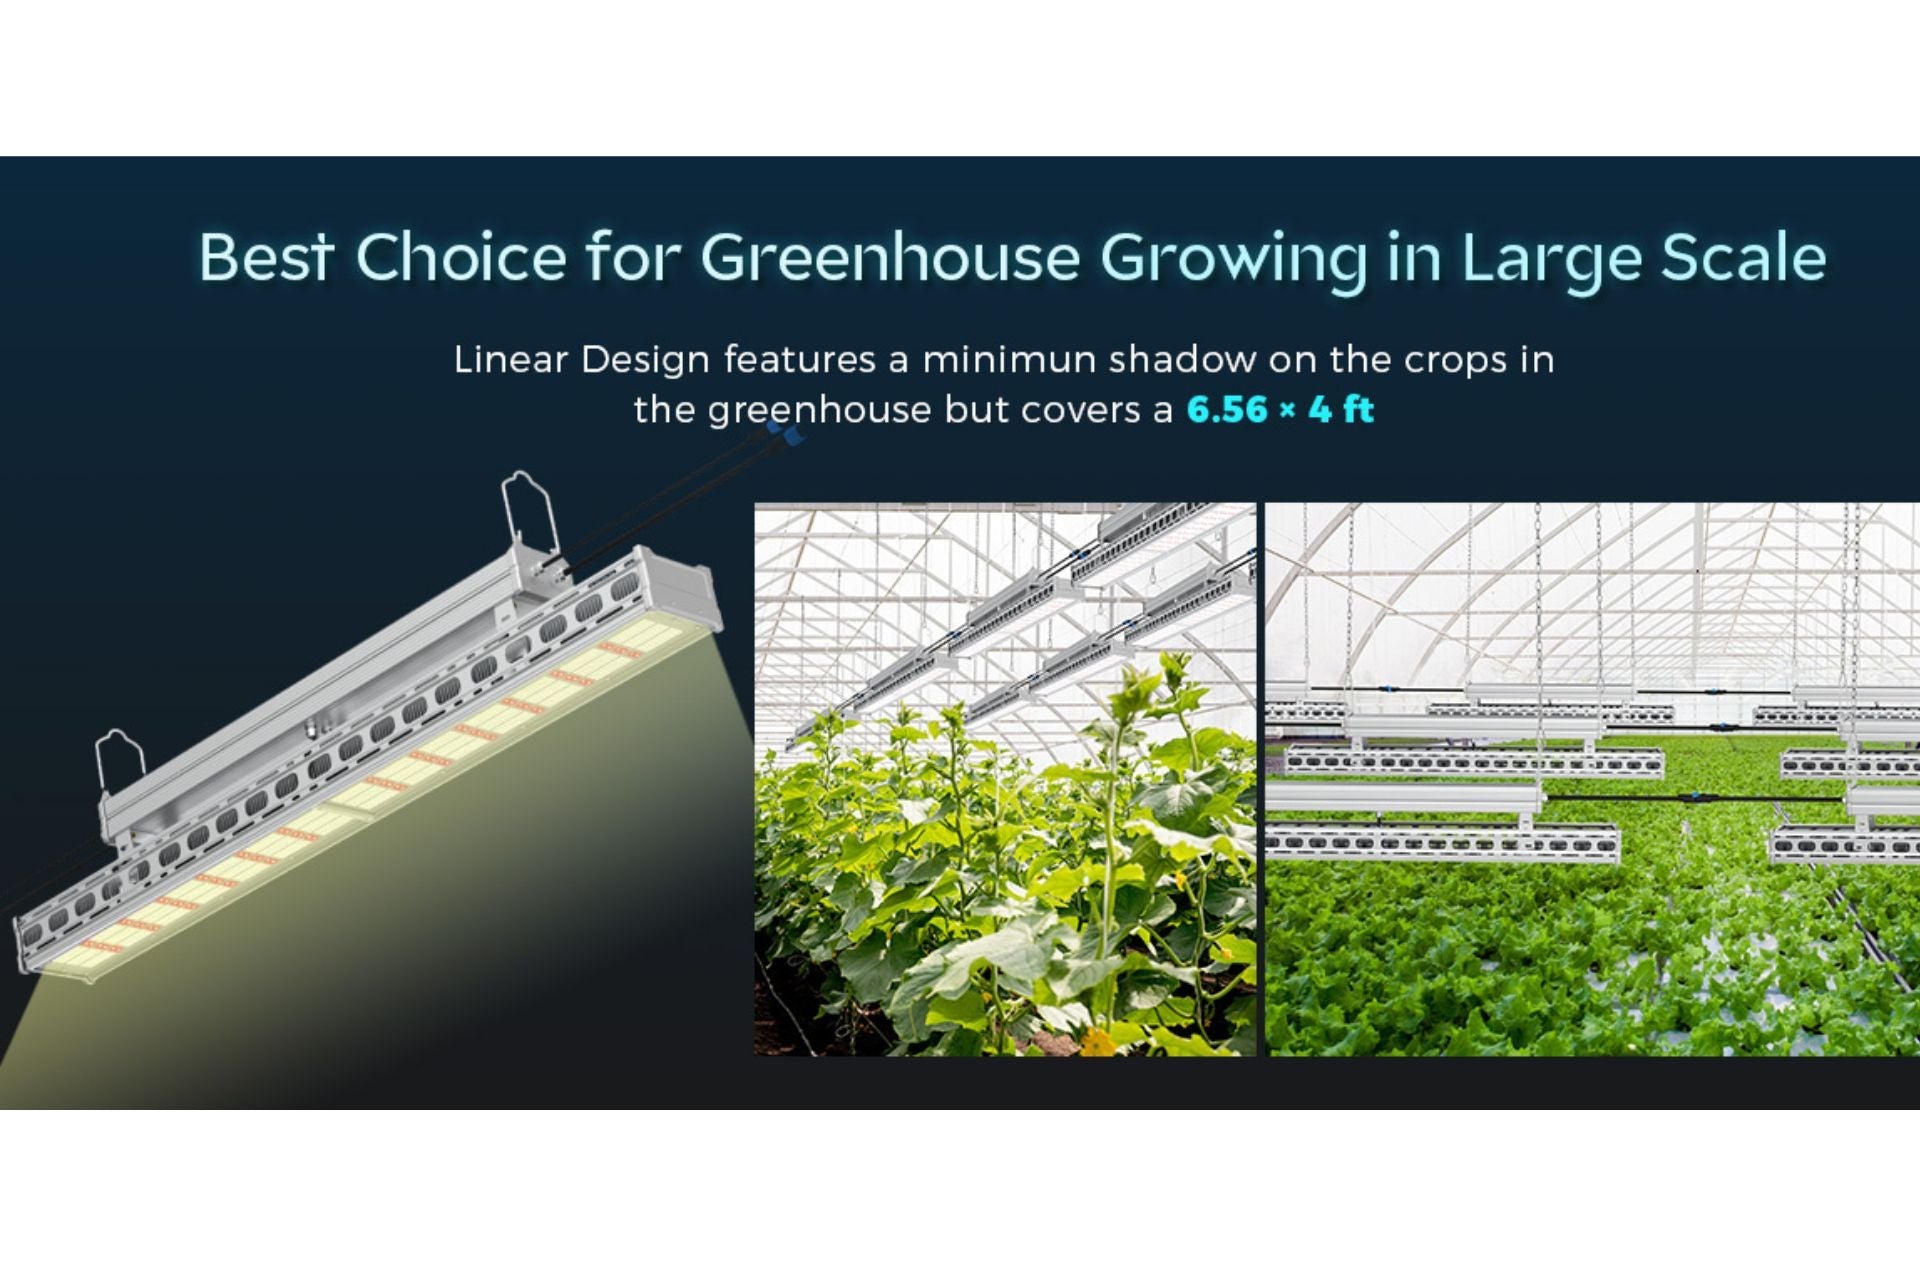 Why are LEDs the Best Lighting Option for Greenhouses?